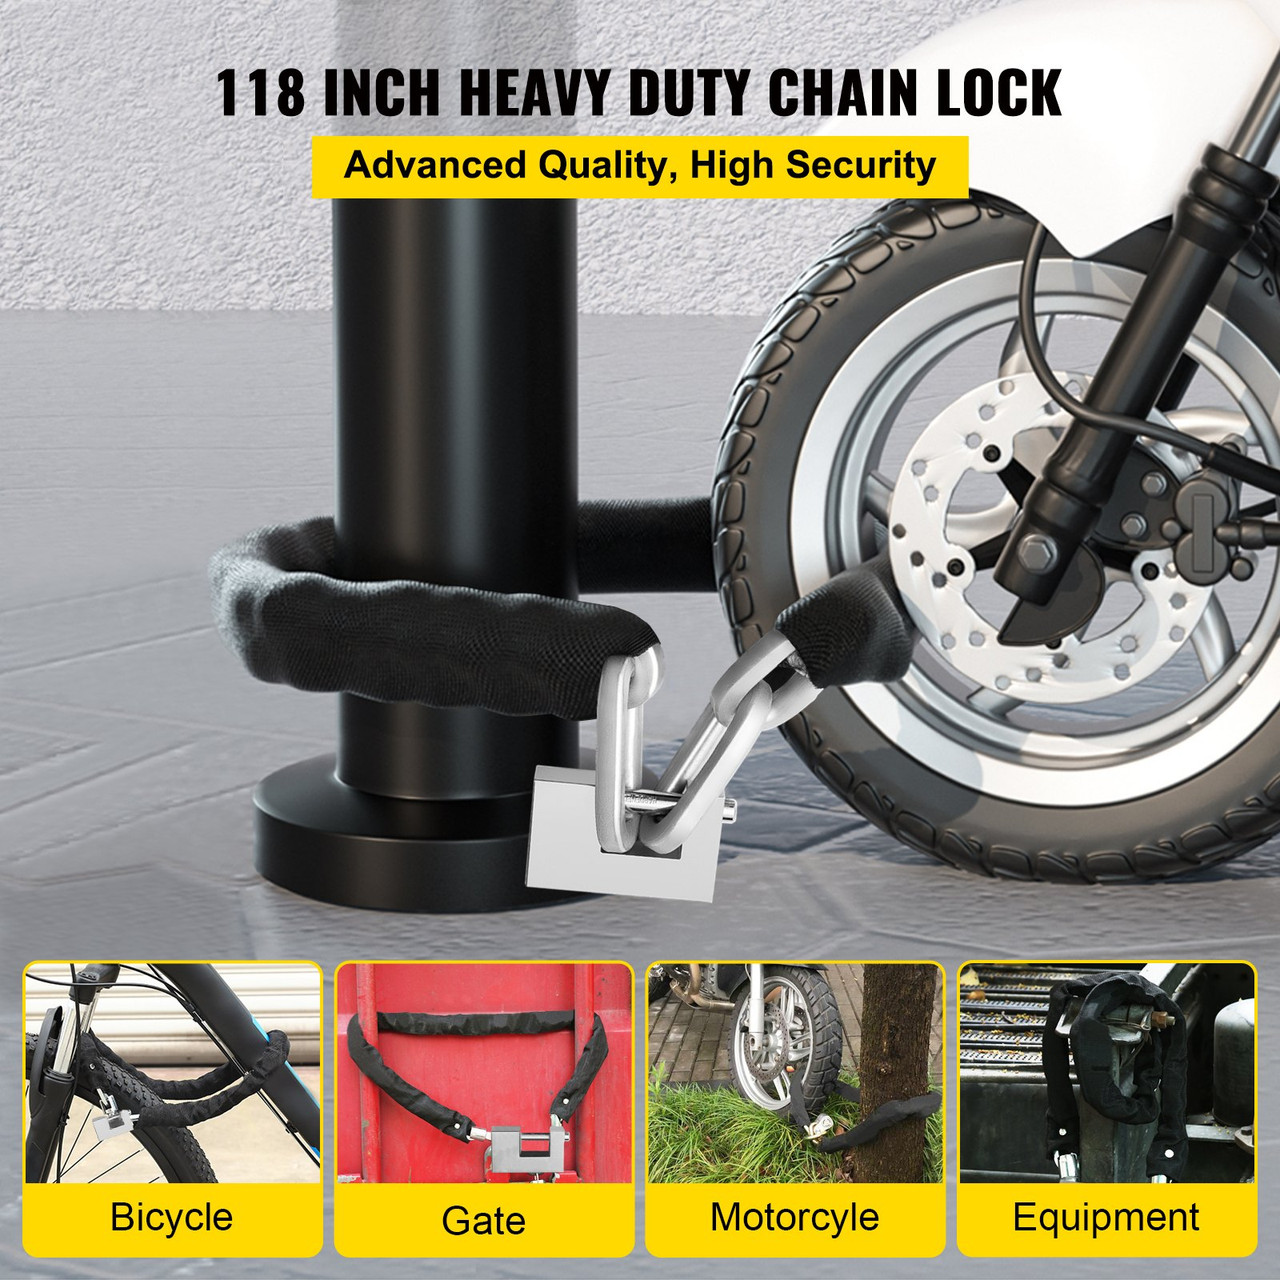 Heavy Duty Chain Lock, 2/5 Inch x 9.83 Foot Security Chain and Lock Kit, Premium Case-Hardened Chain Pure Brass Lock Core with 3 Keys, Fit for Bikes, Motorcycle, Generator, Gates, Scooter